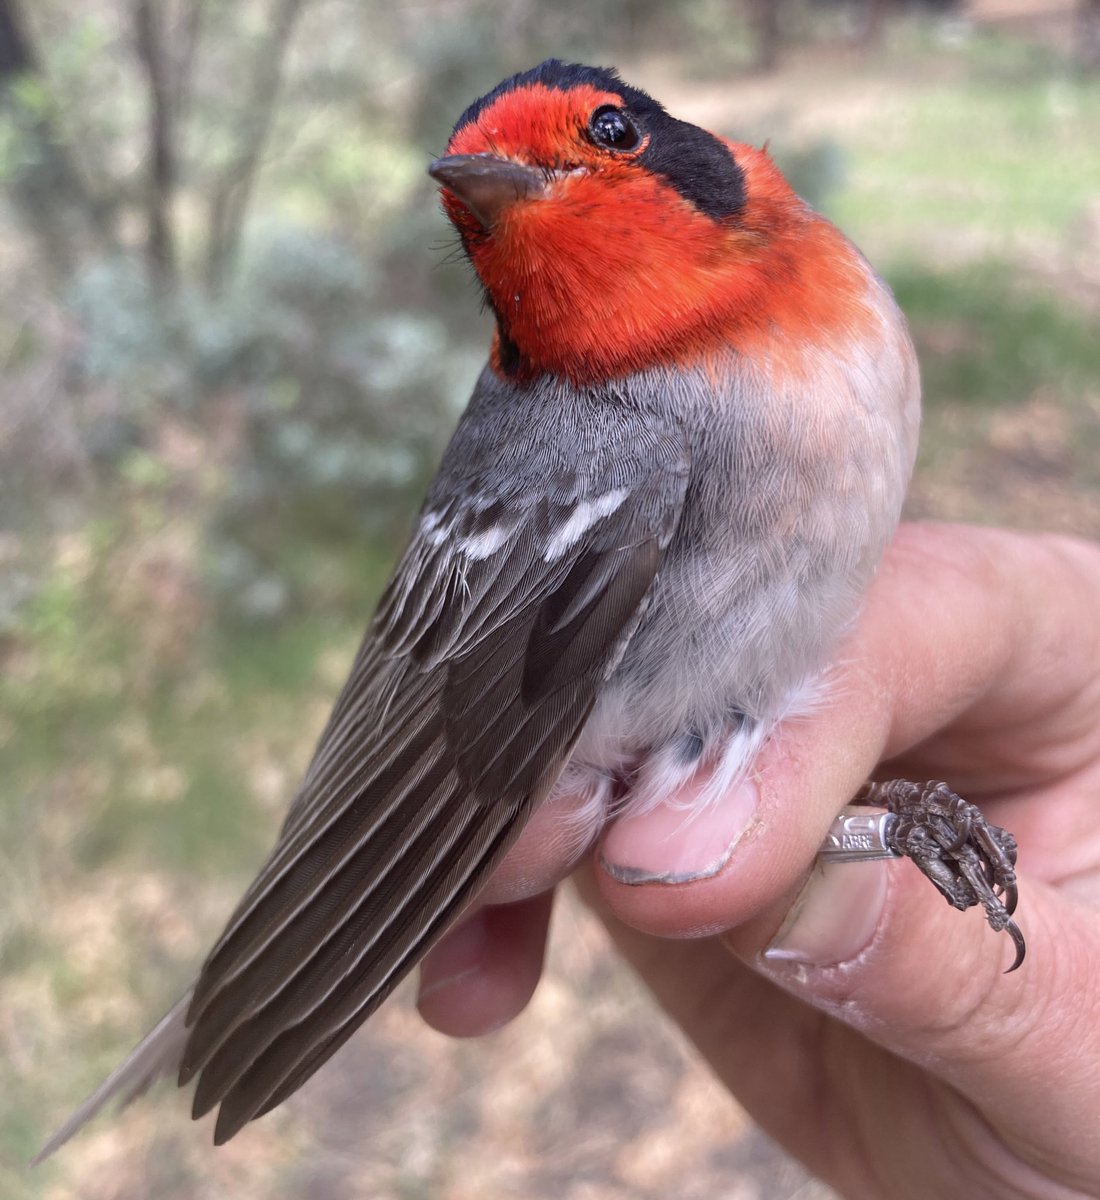 No #feathermites, but still a mitey cute Red-faced Warbler! #GilaNationalForest